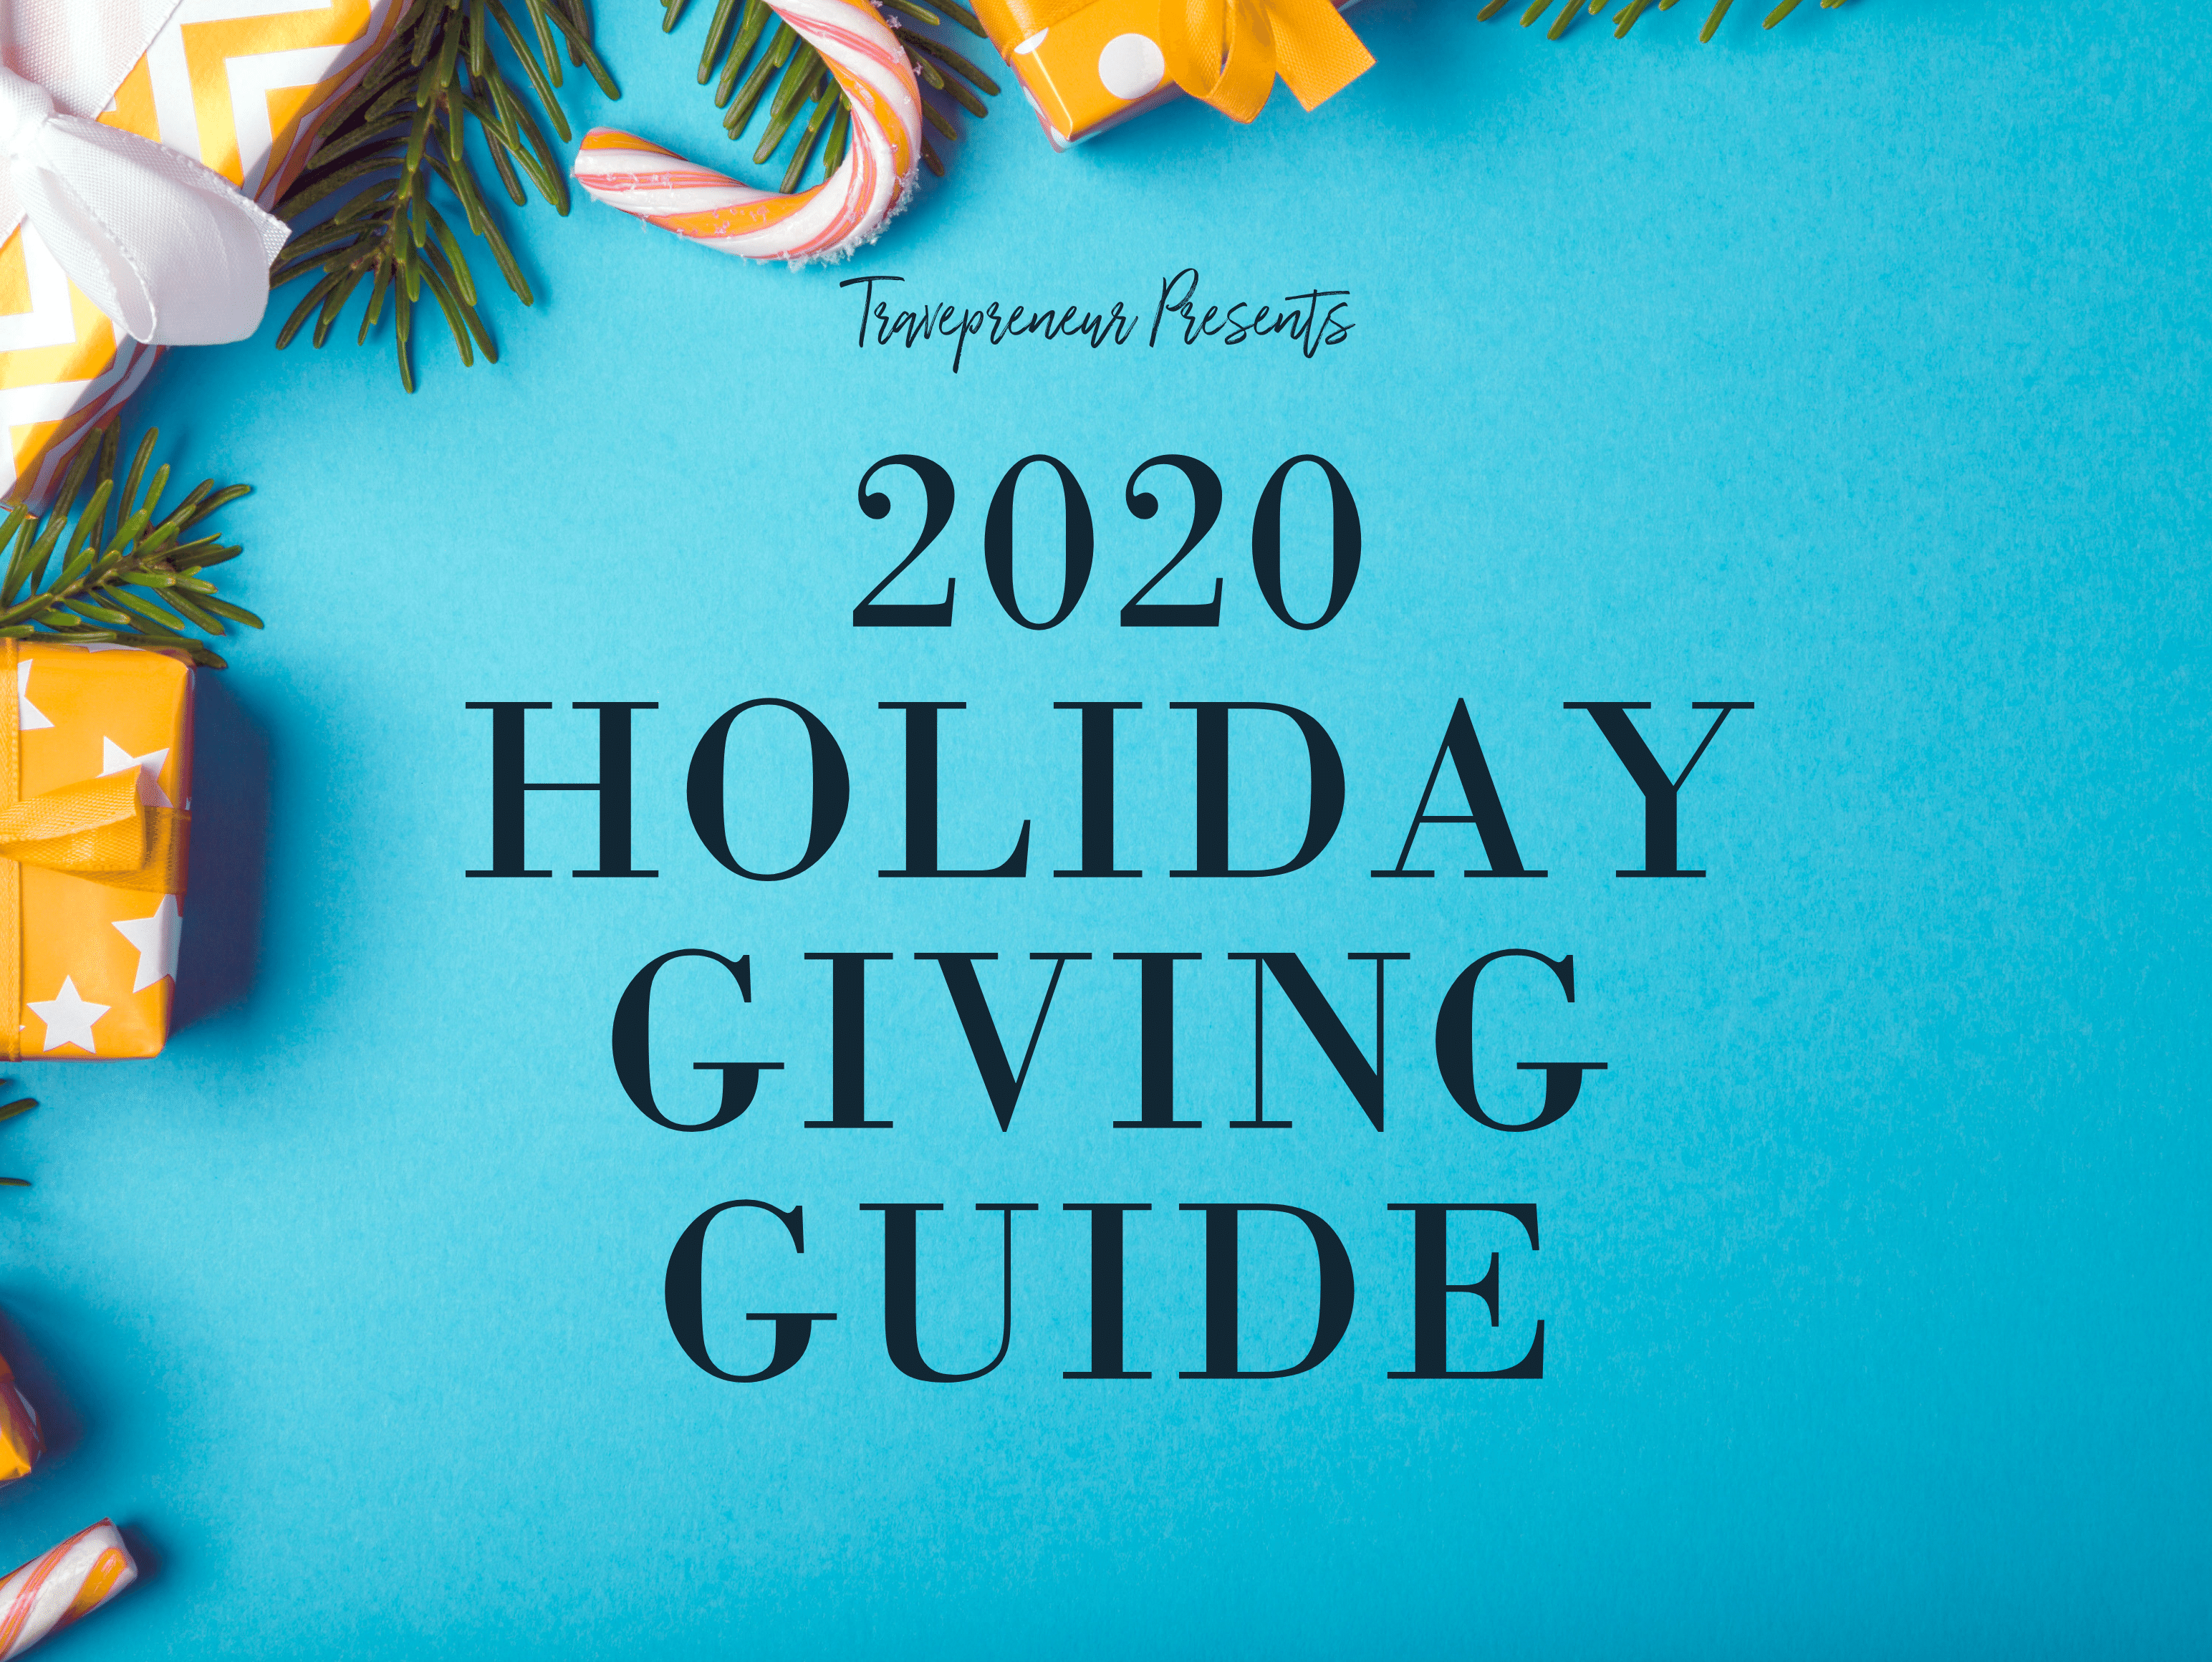 Holiday Giving Guide 2020 from Travepreneur